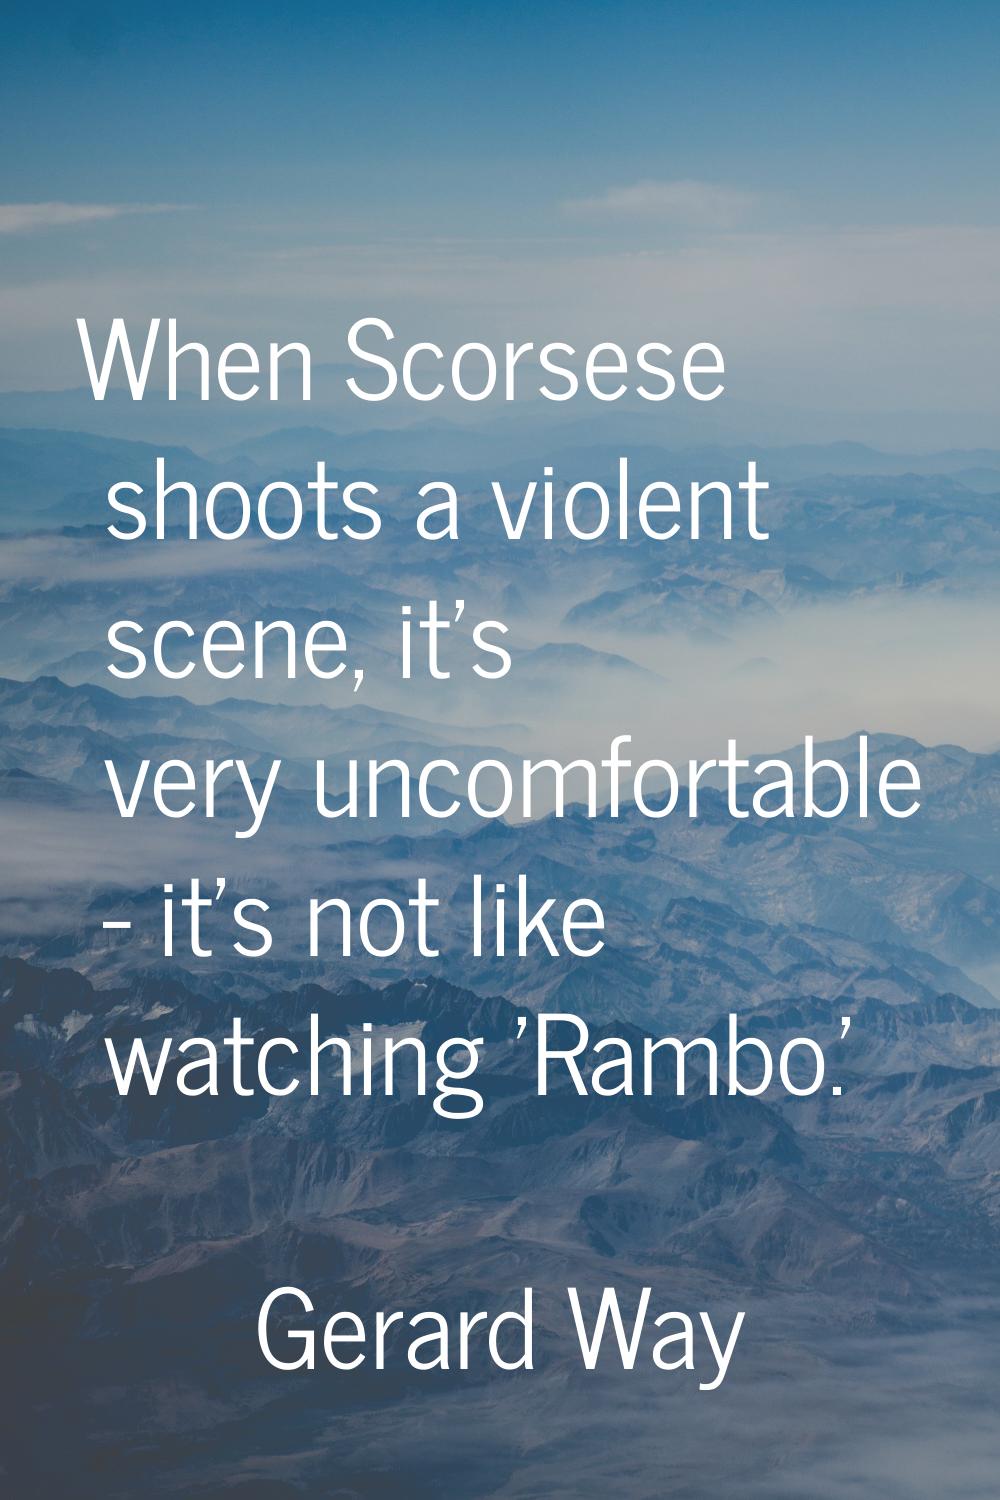 When Scorsese shoots a violent scene, it's very uncomfortable - it's not like watching 'Rambo.'